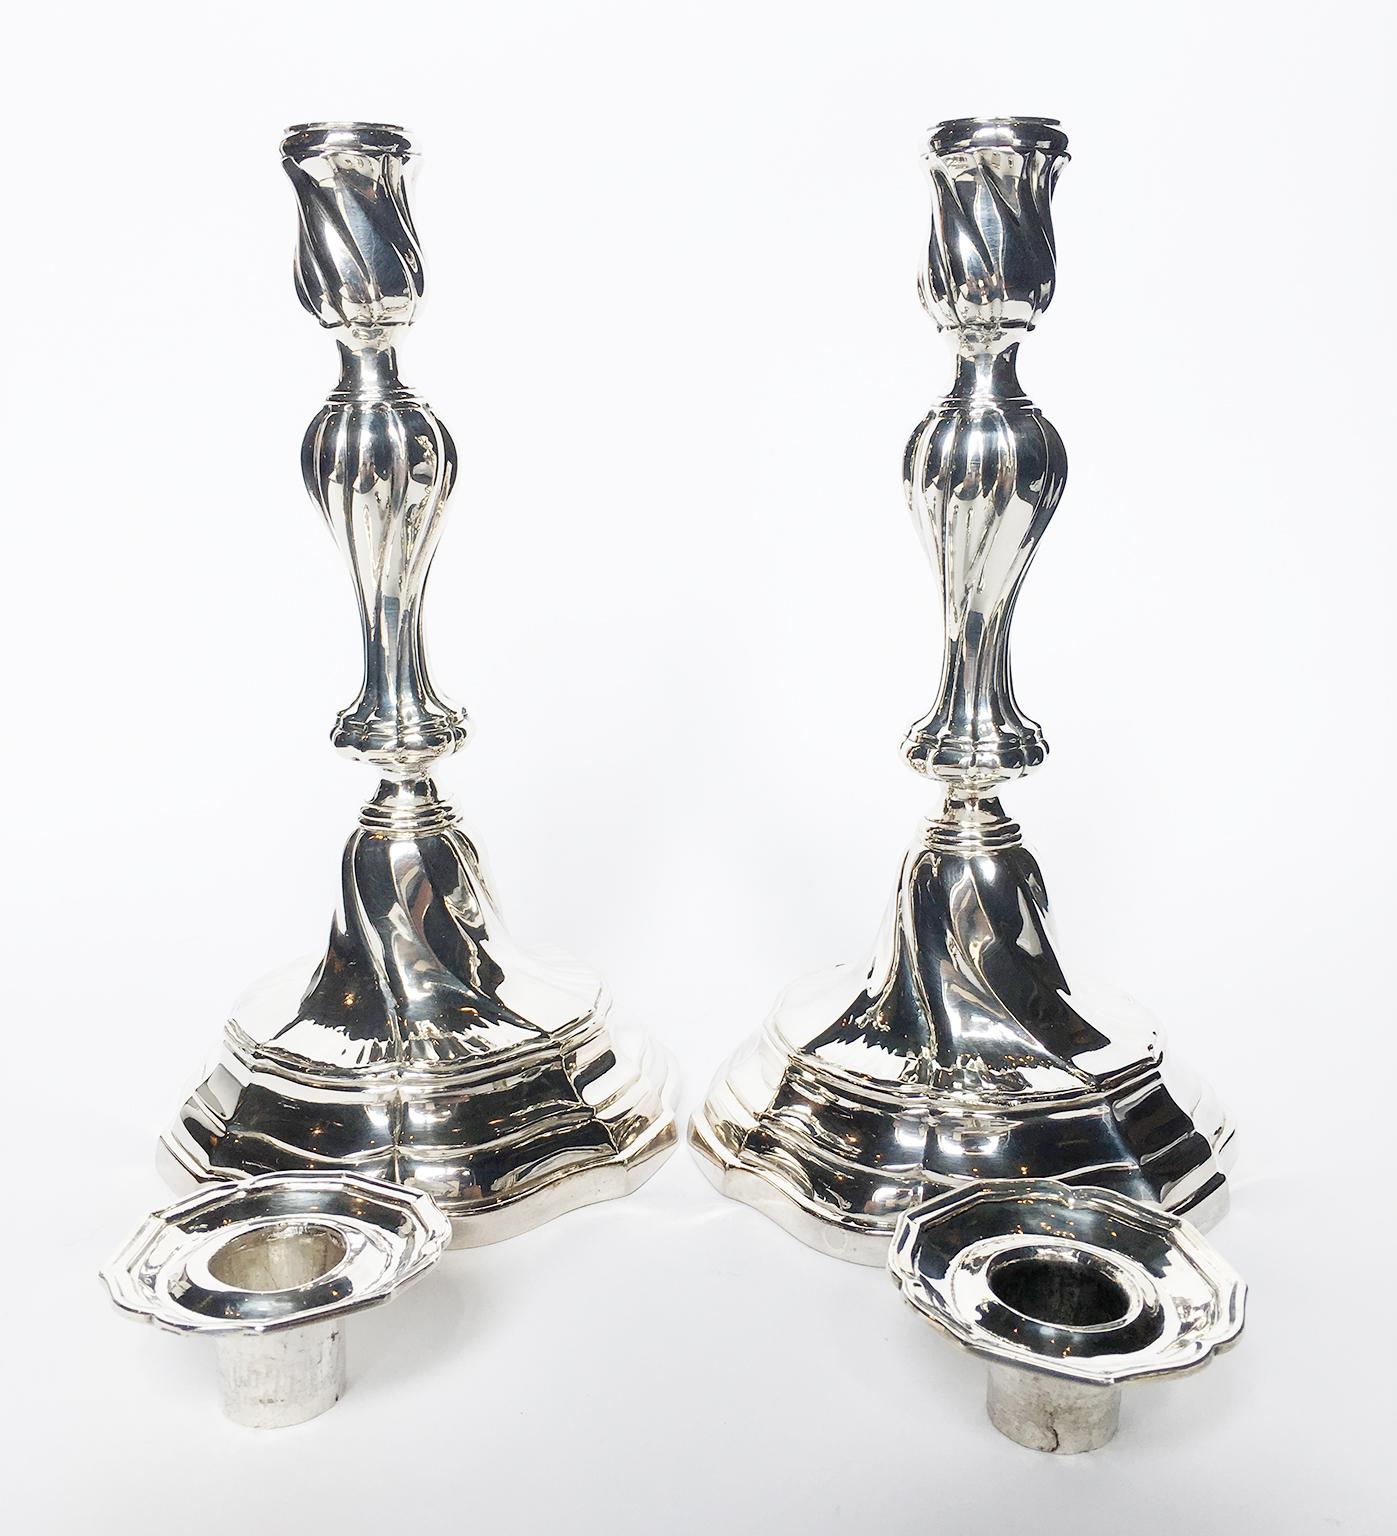 Pair of sterling silver candlesticks
Turin, circa 1760-1780
Taster and counter-taster: Carlo Micha, in service since 1759.
They measure 10.15 in (25.8 cm) in height x 5.51 in (14 cm) in diameter
lb 2.2 (kg 1)
State of conservation: almost excellent.